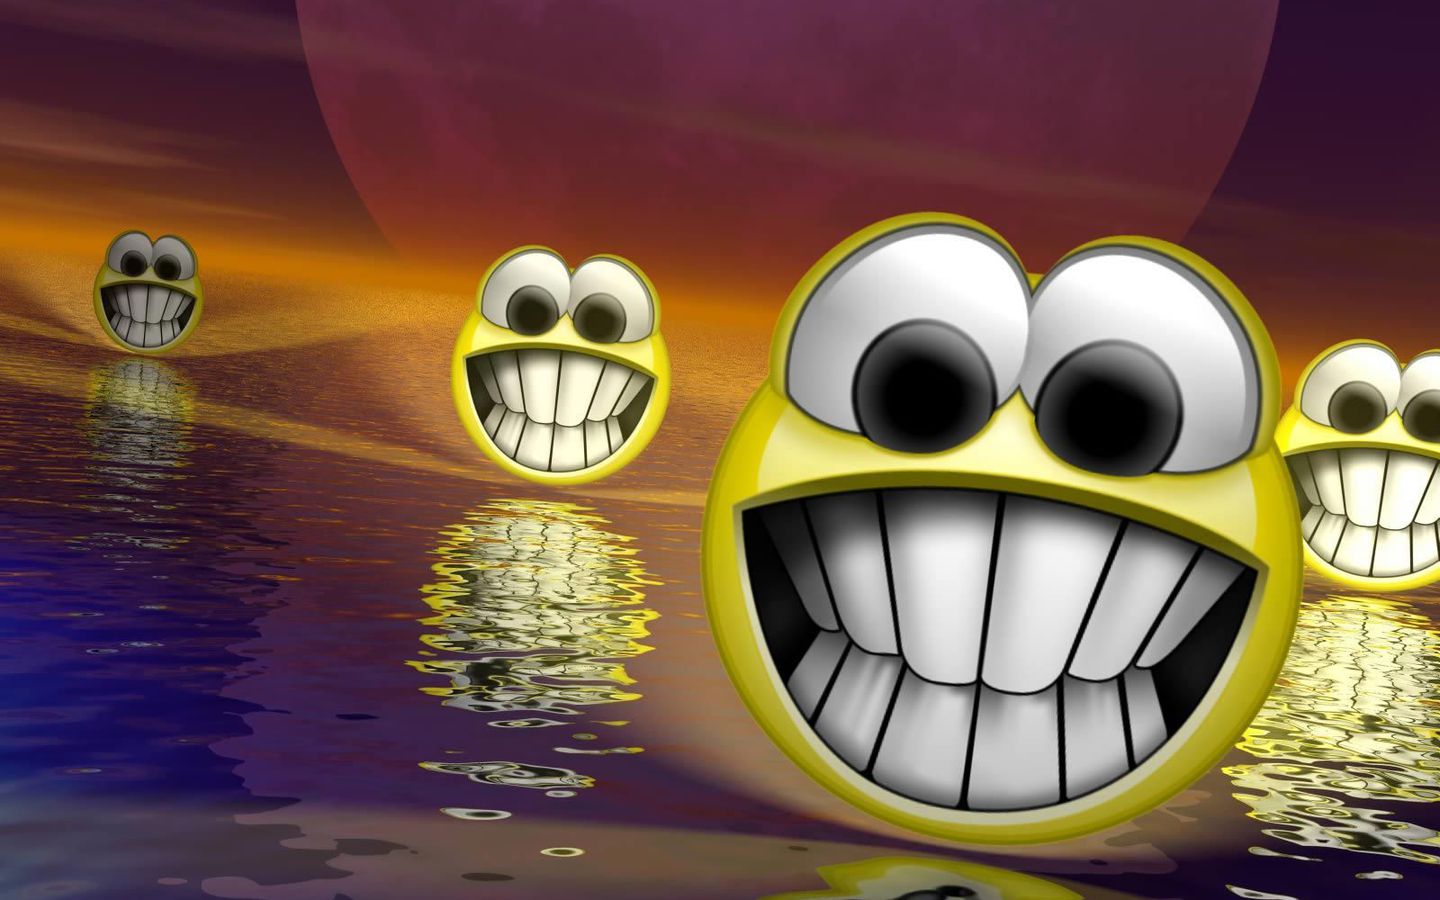 smiley face background hd wallpaper for mobile Facebook 1440x900